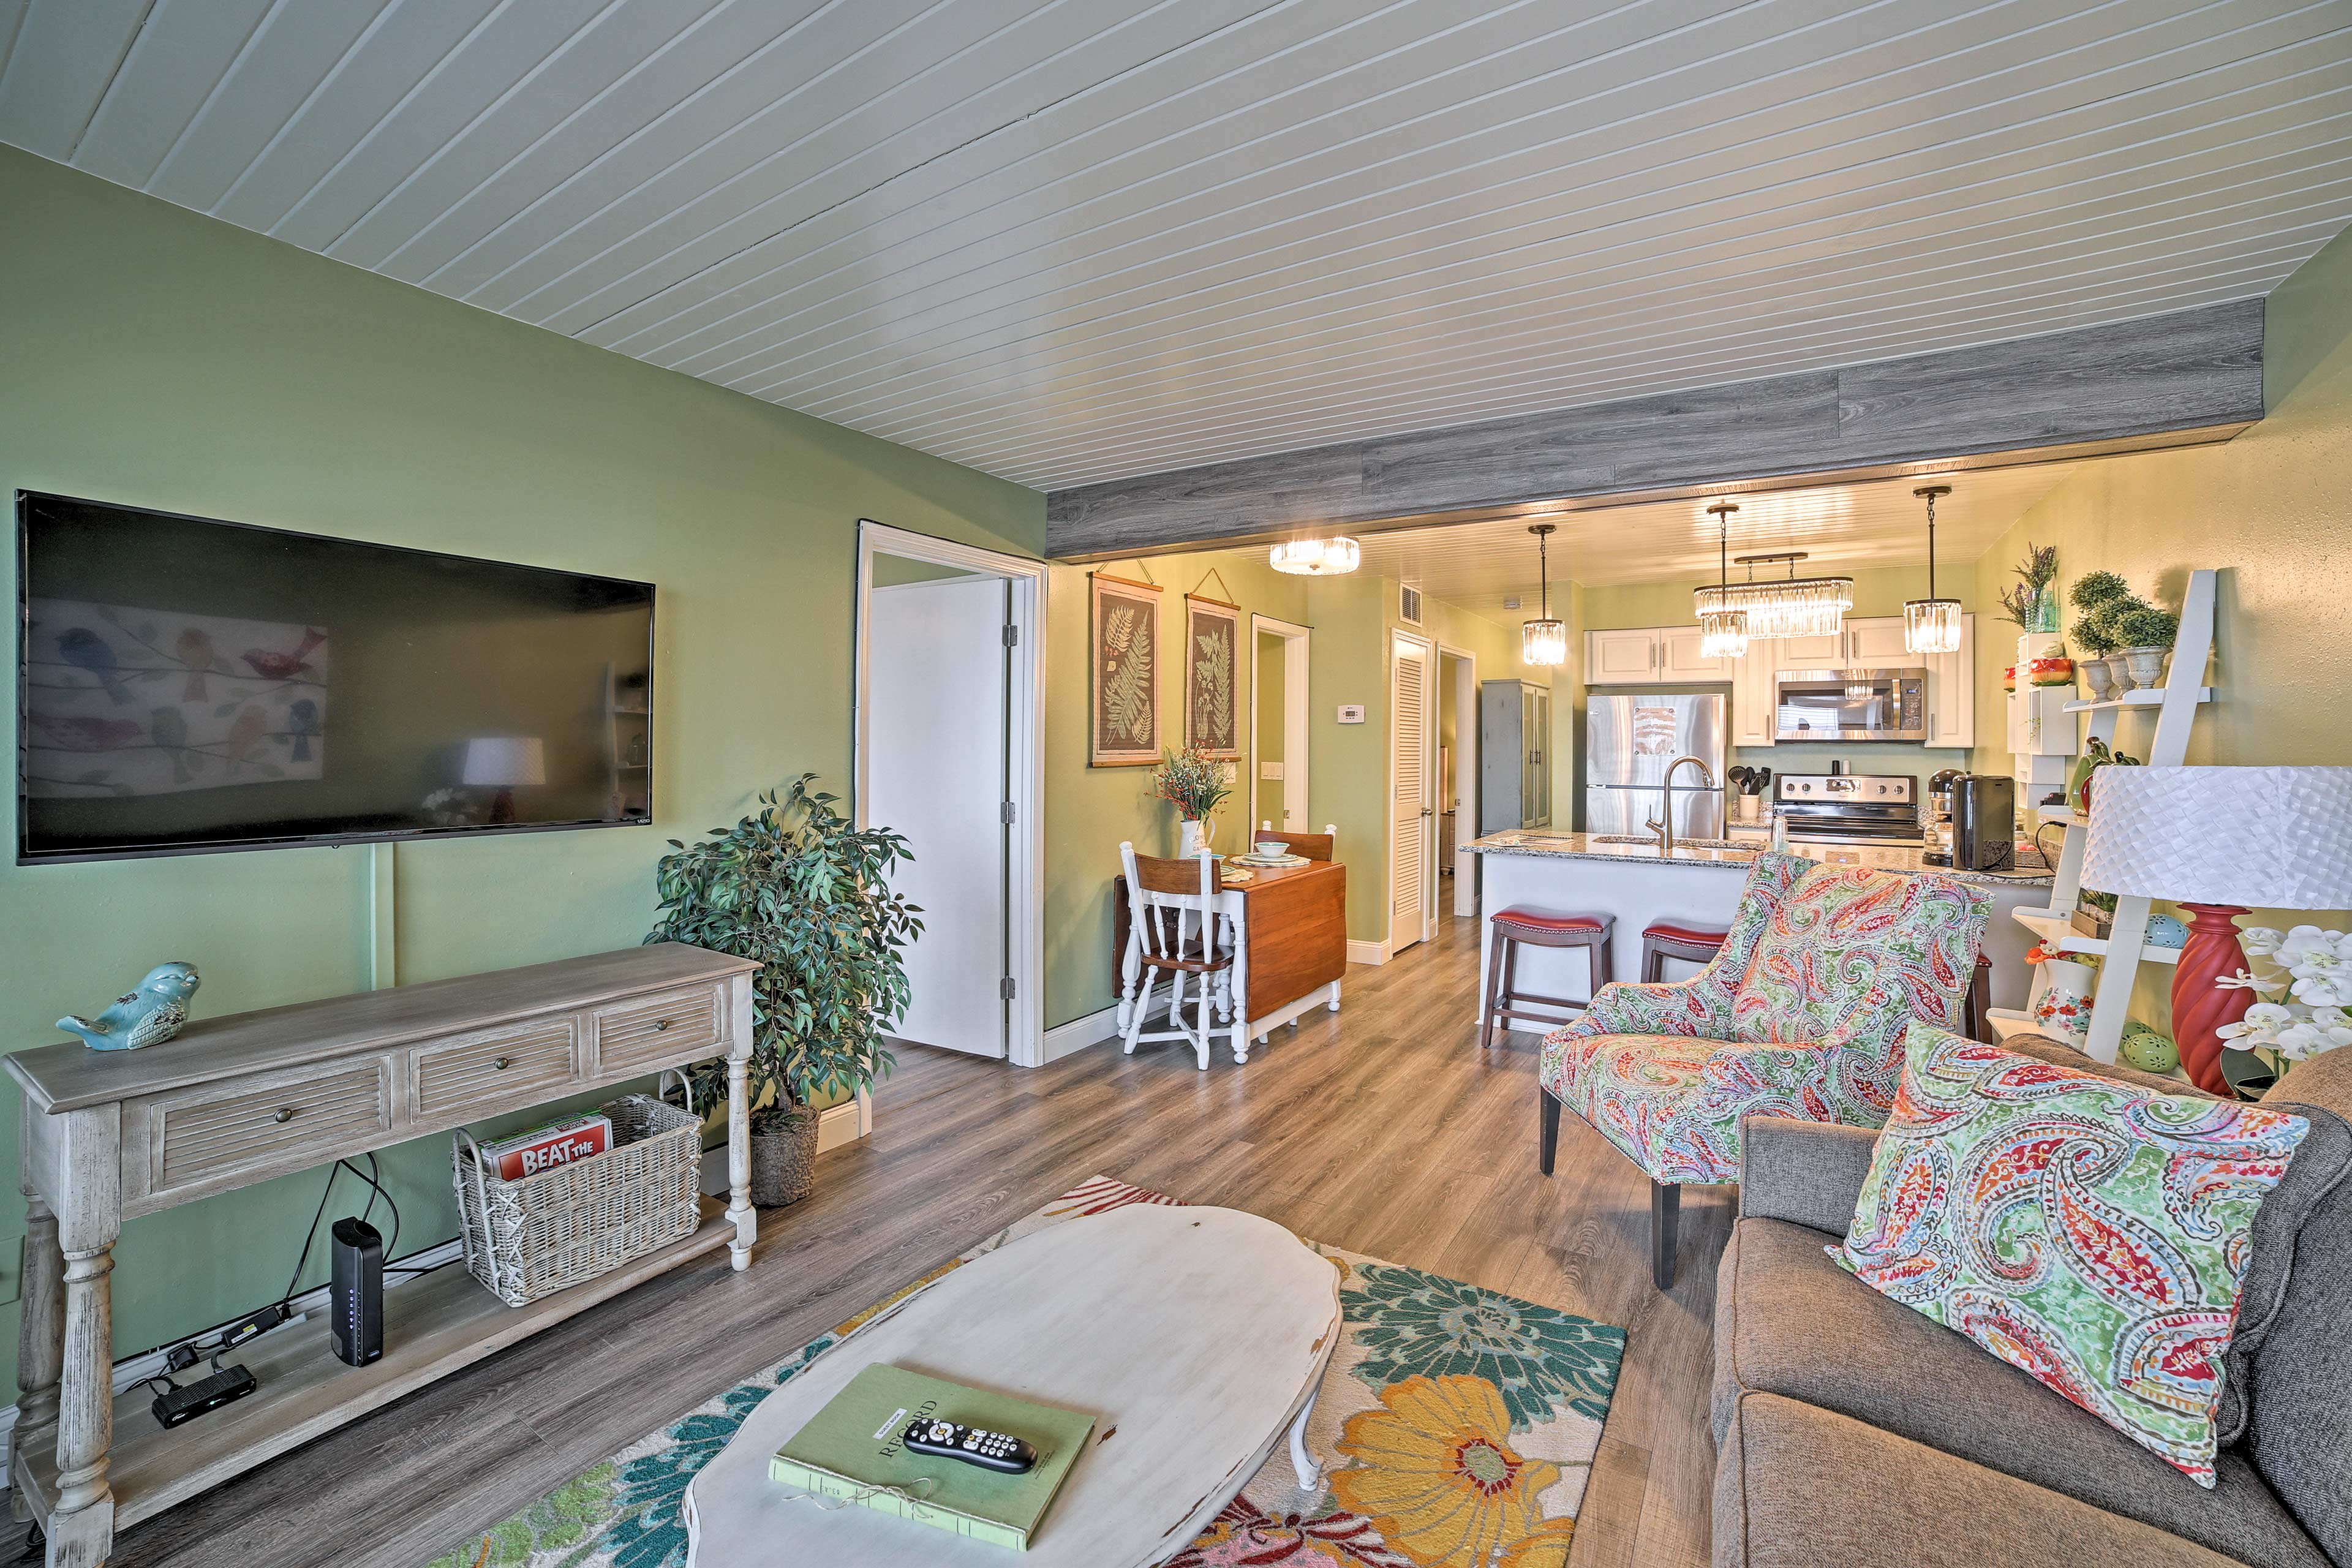 Explore the best of Branson West when you stay at this 2-BR, 2-BA vacation rental condo!